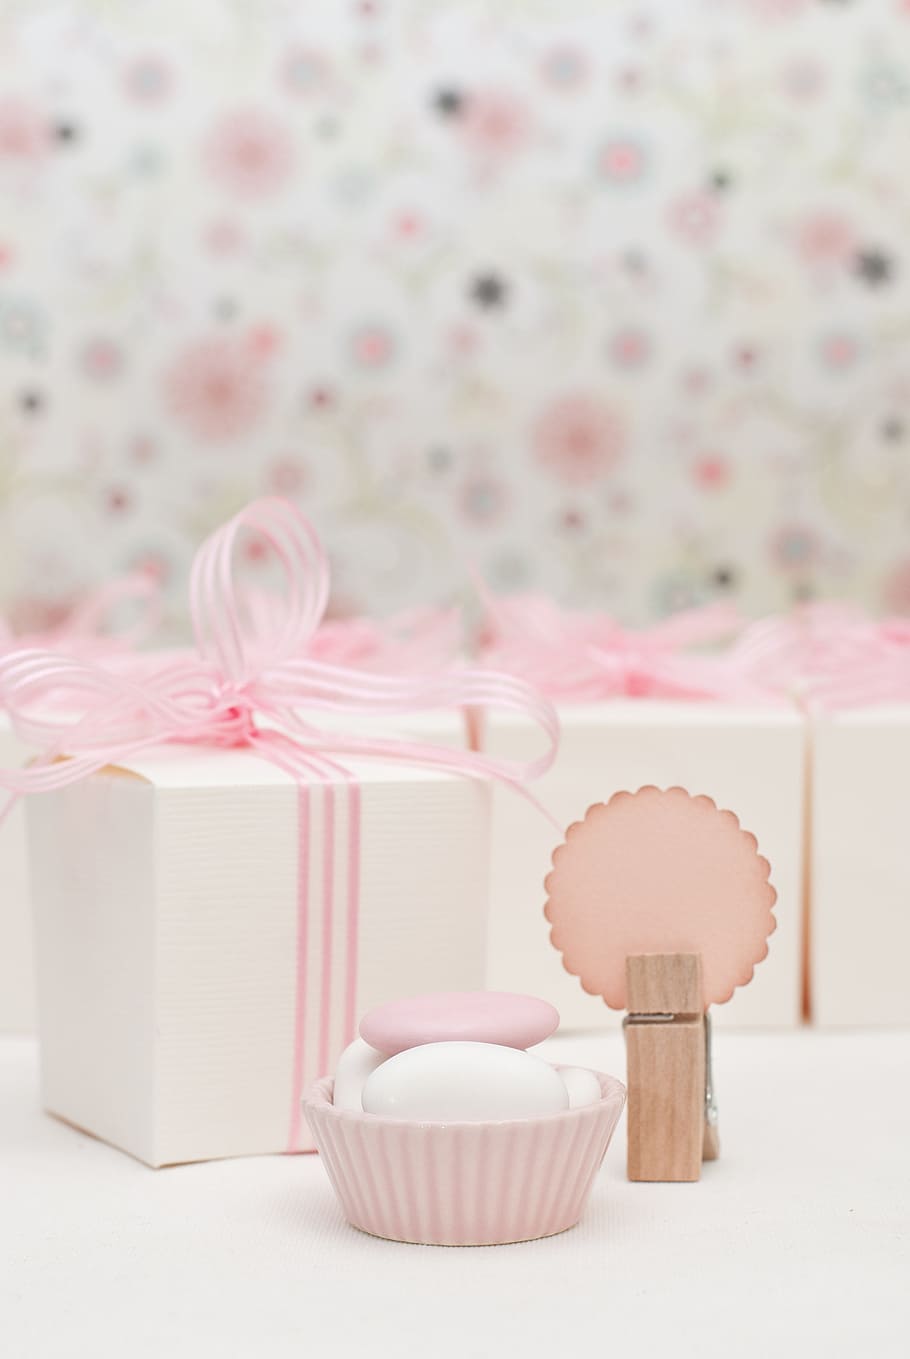 gift boxes, table, festival, dragees, easter, still life, sweet food, celebration, sweet, pink color